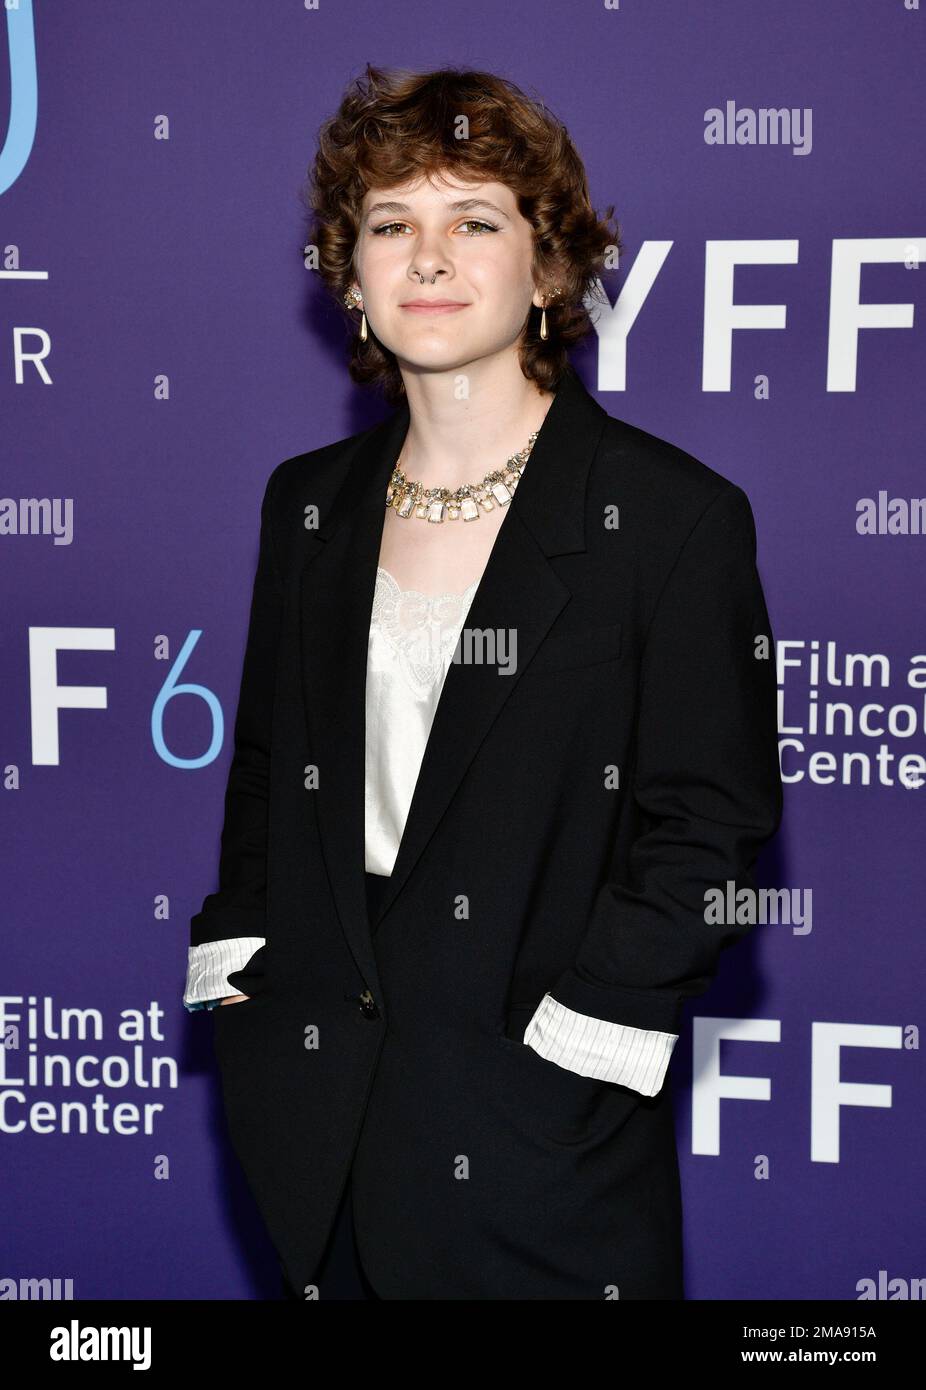 Actor Liv McNeil attends the premiere of Women Talking during